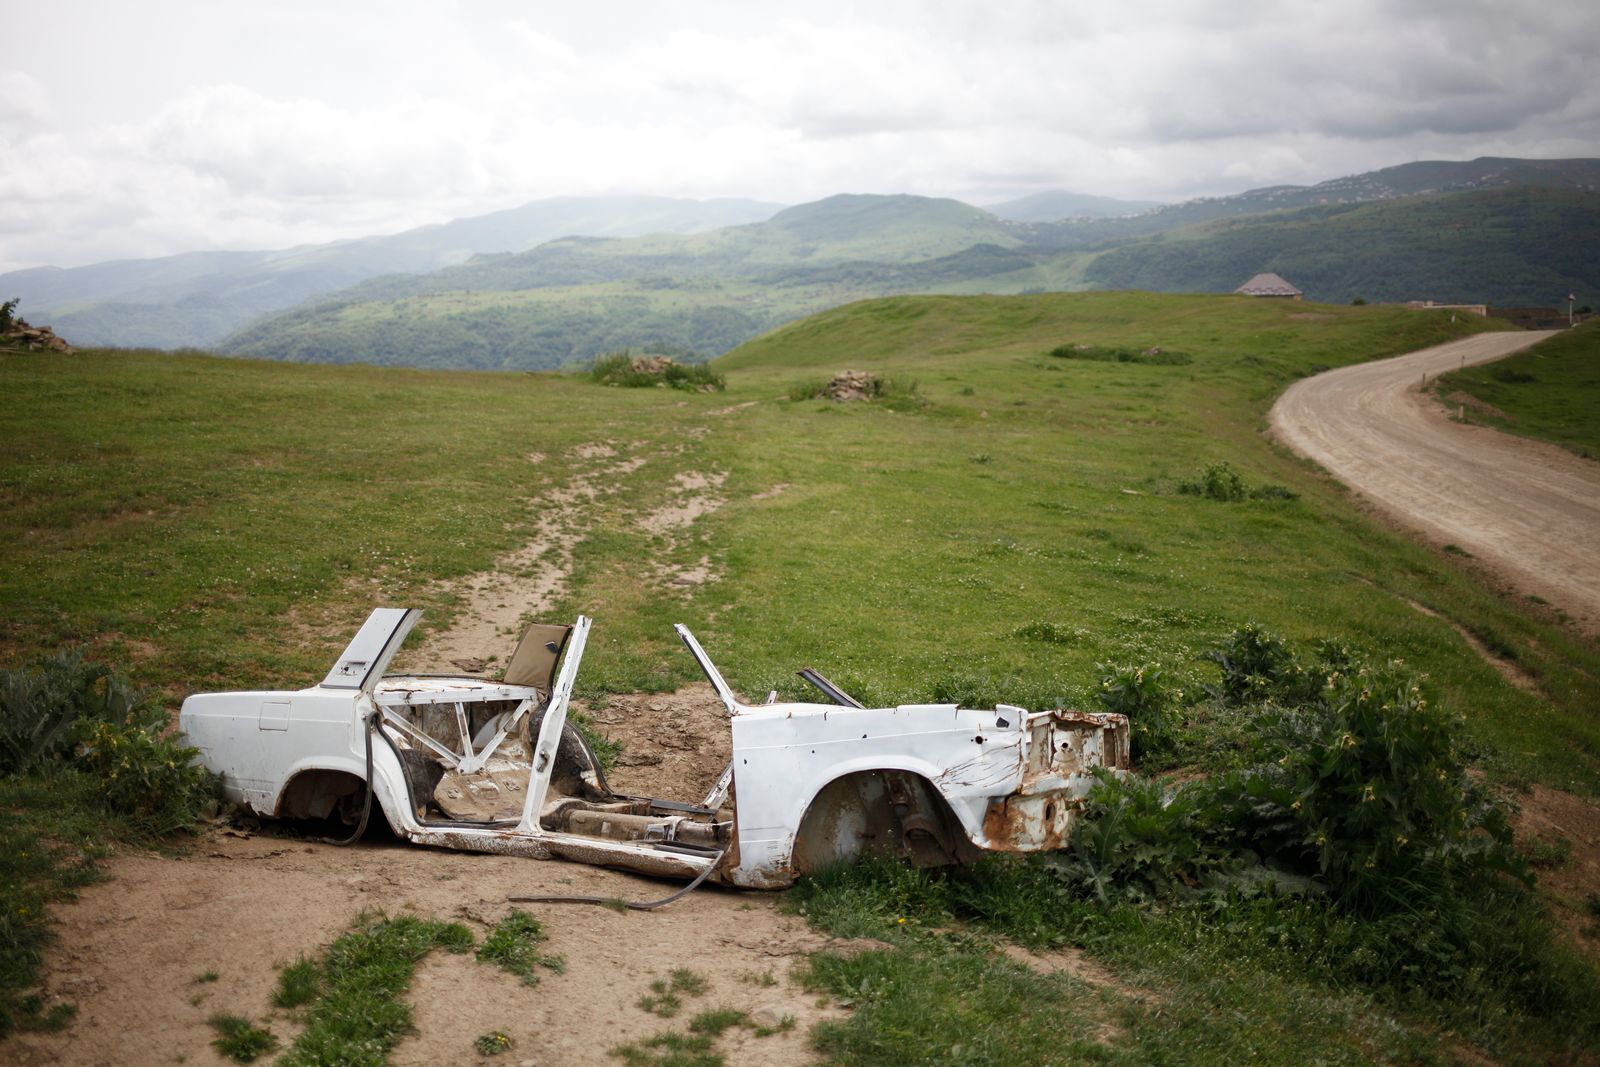 © EDUARD KORNIYENKO - A view on the remains of body shell of Lada car near the road in the mountains of Dagestan.